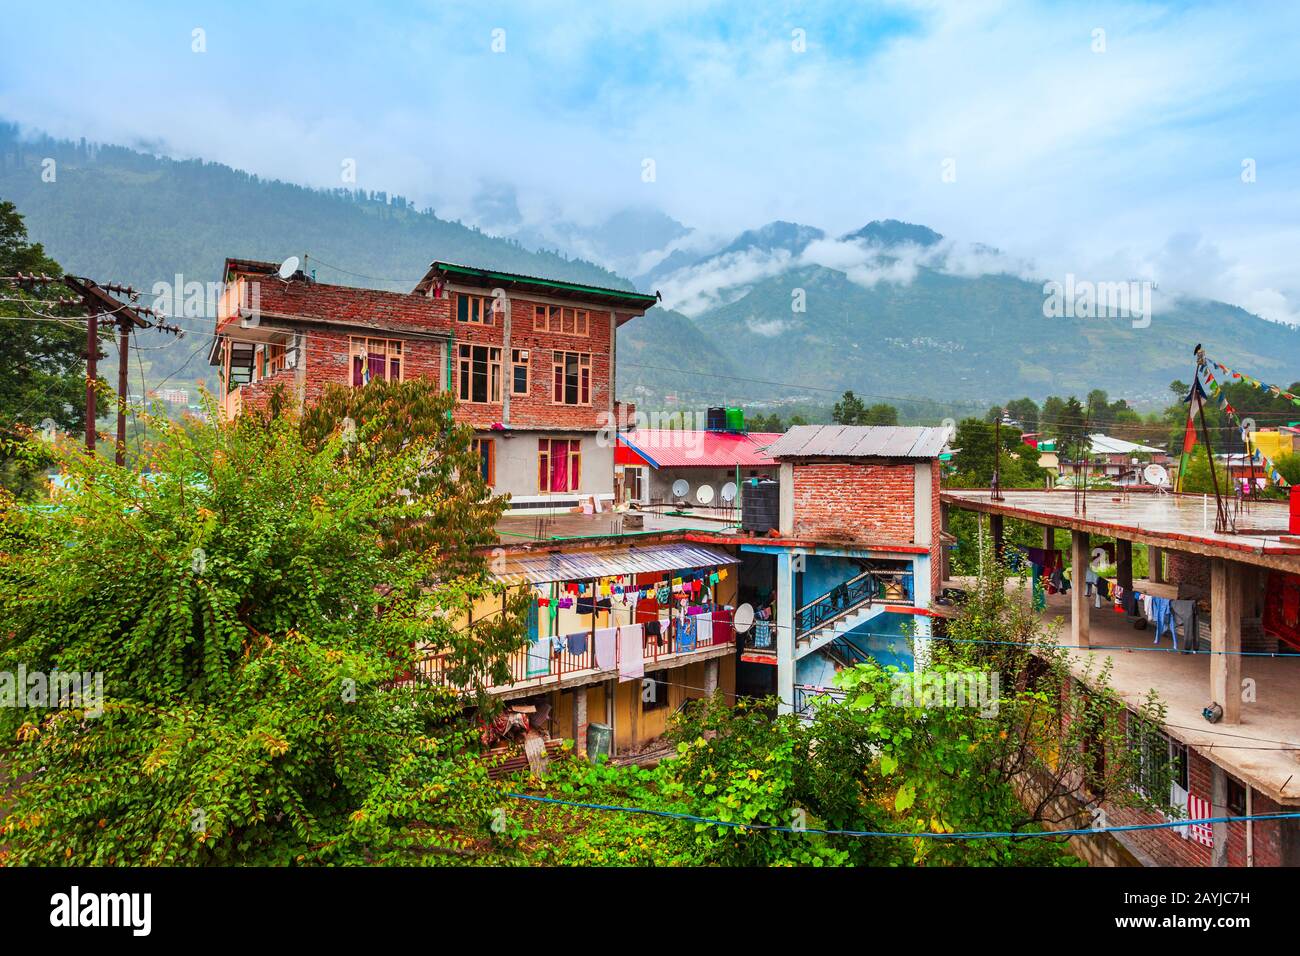 Typical local houses in Manali town, Himachal Pradesh state of India Stock Photo